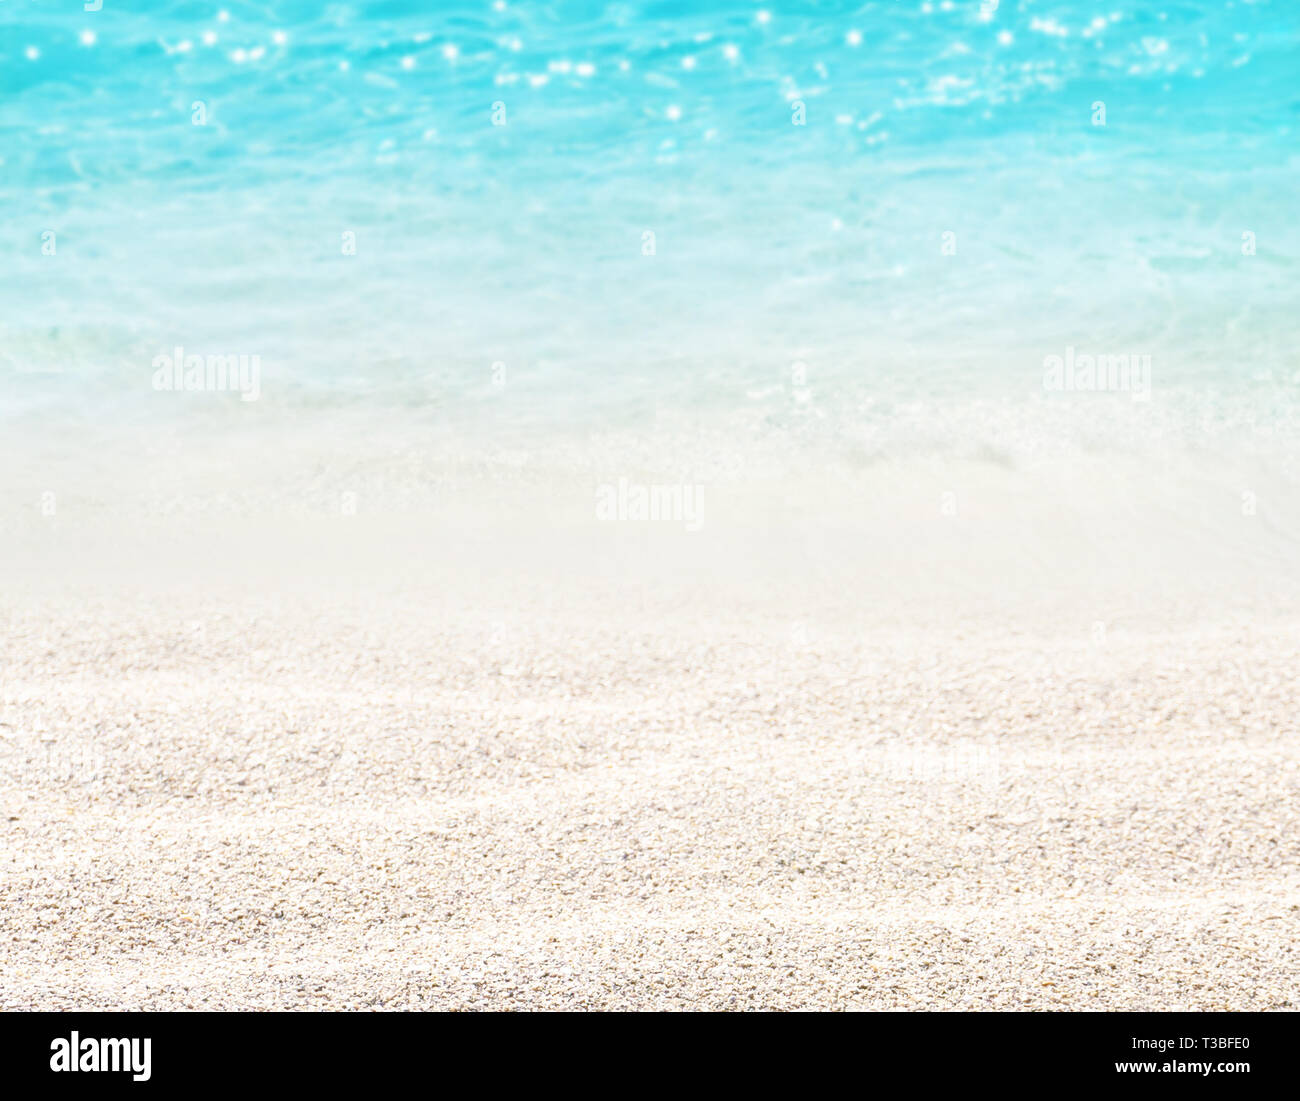 Beach blurred background. Sandy shore washing by the wave. Dreams summer vacations destination. Crystal clear sparkling sea. Stock Photo